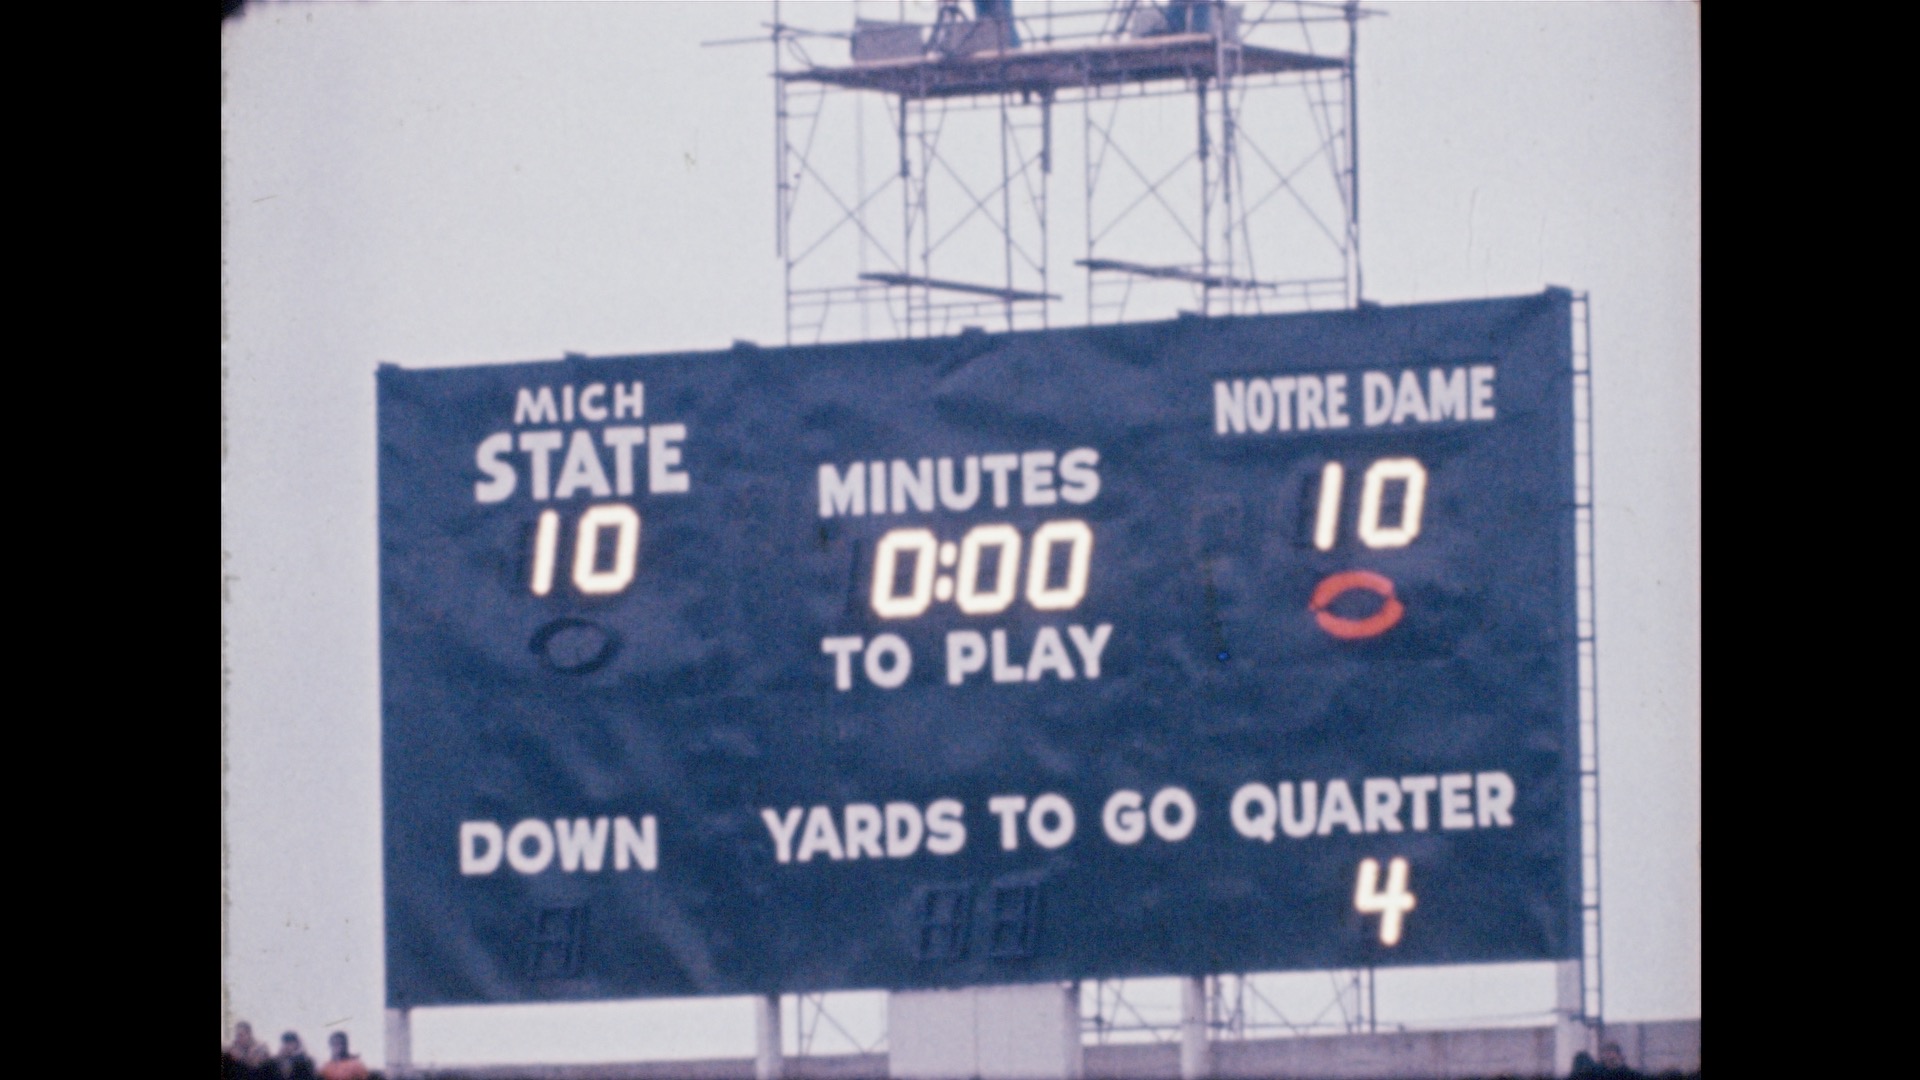 MSU Football vs. Notre Dame "Game of the Century", 1966 (color)